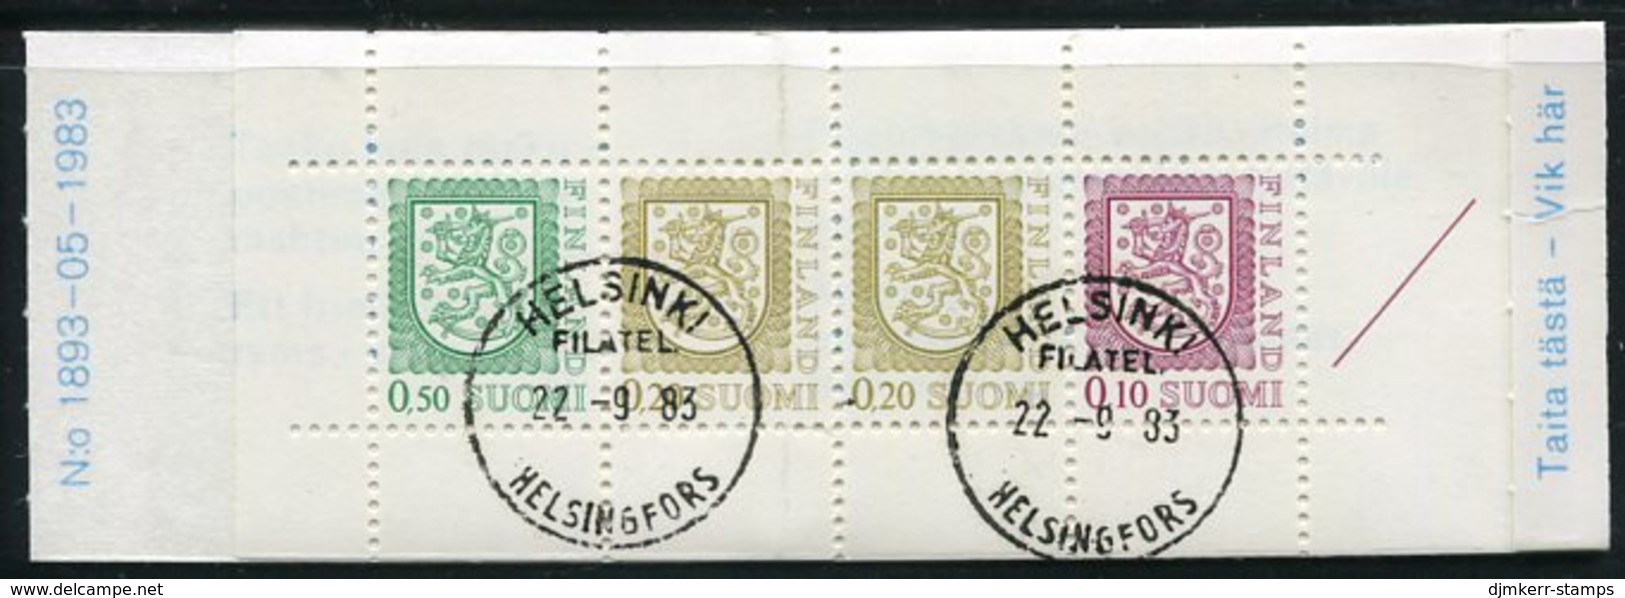 FINLAND 1983 Lion Definitive 1 Mk. Complete Booklet, Cancelled.  Michel MH 14 - Booklets